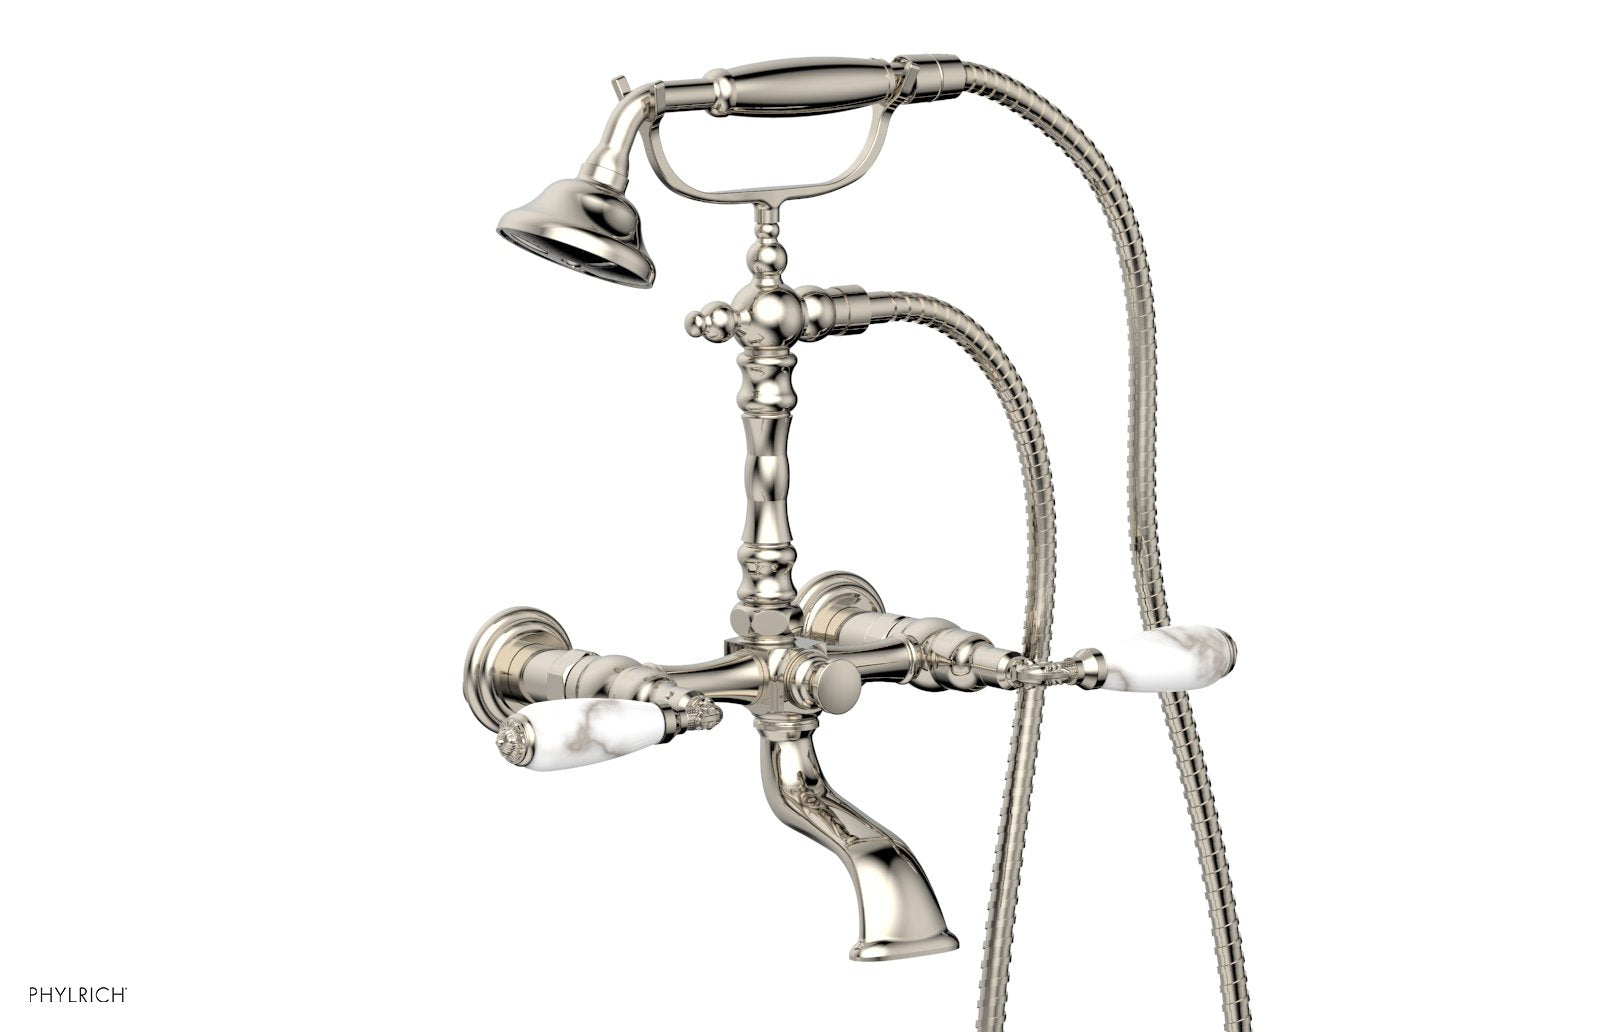 Phylrich VALENCIA Exposed Tub & Hand Shower - White Marble Lever Handle